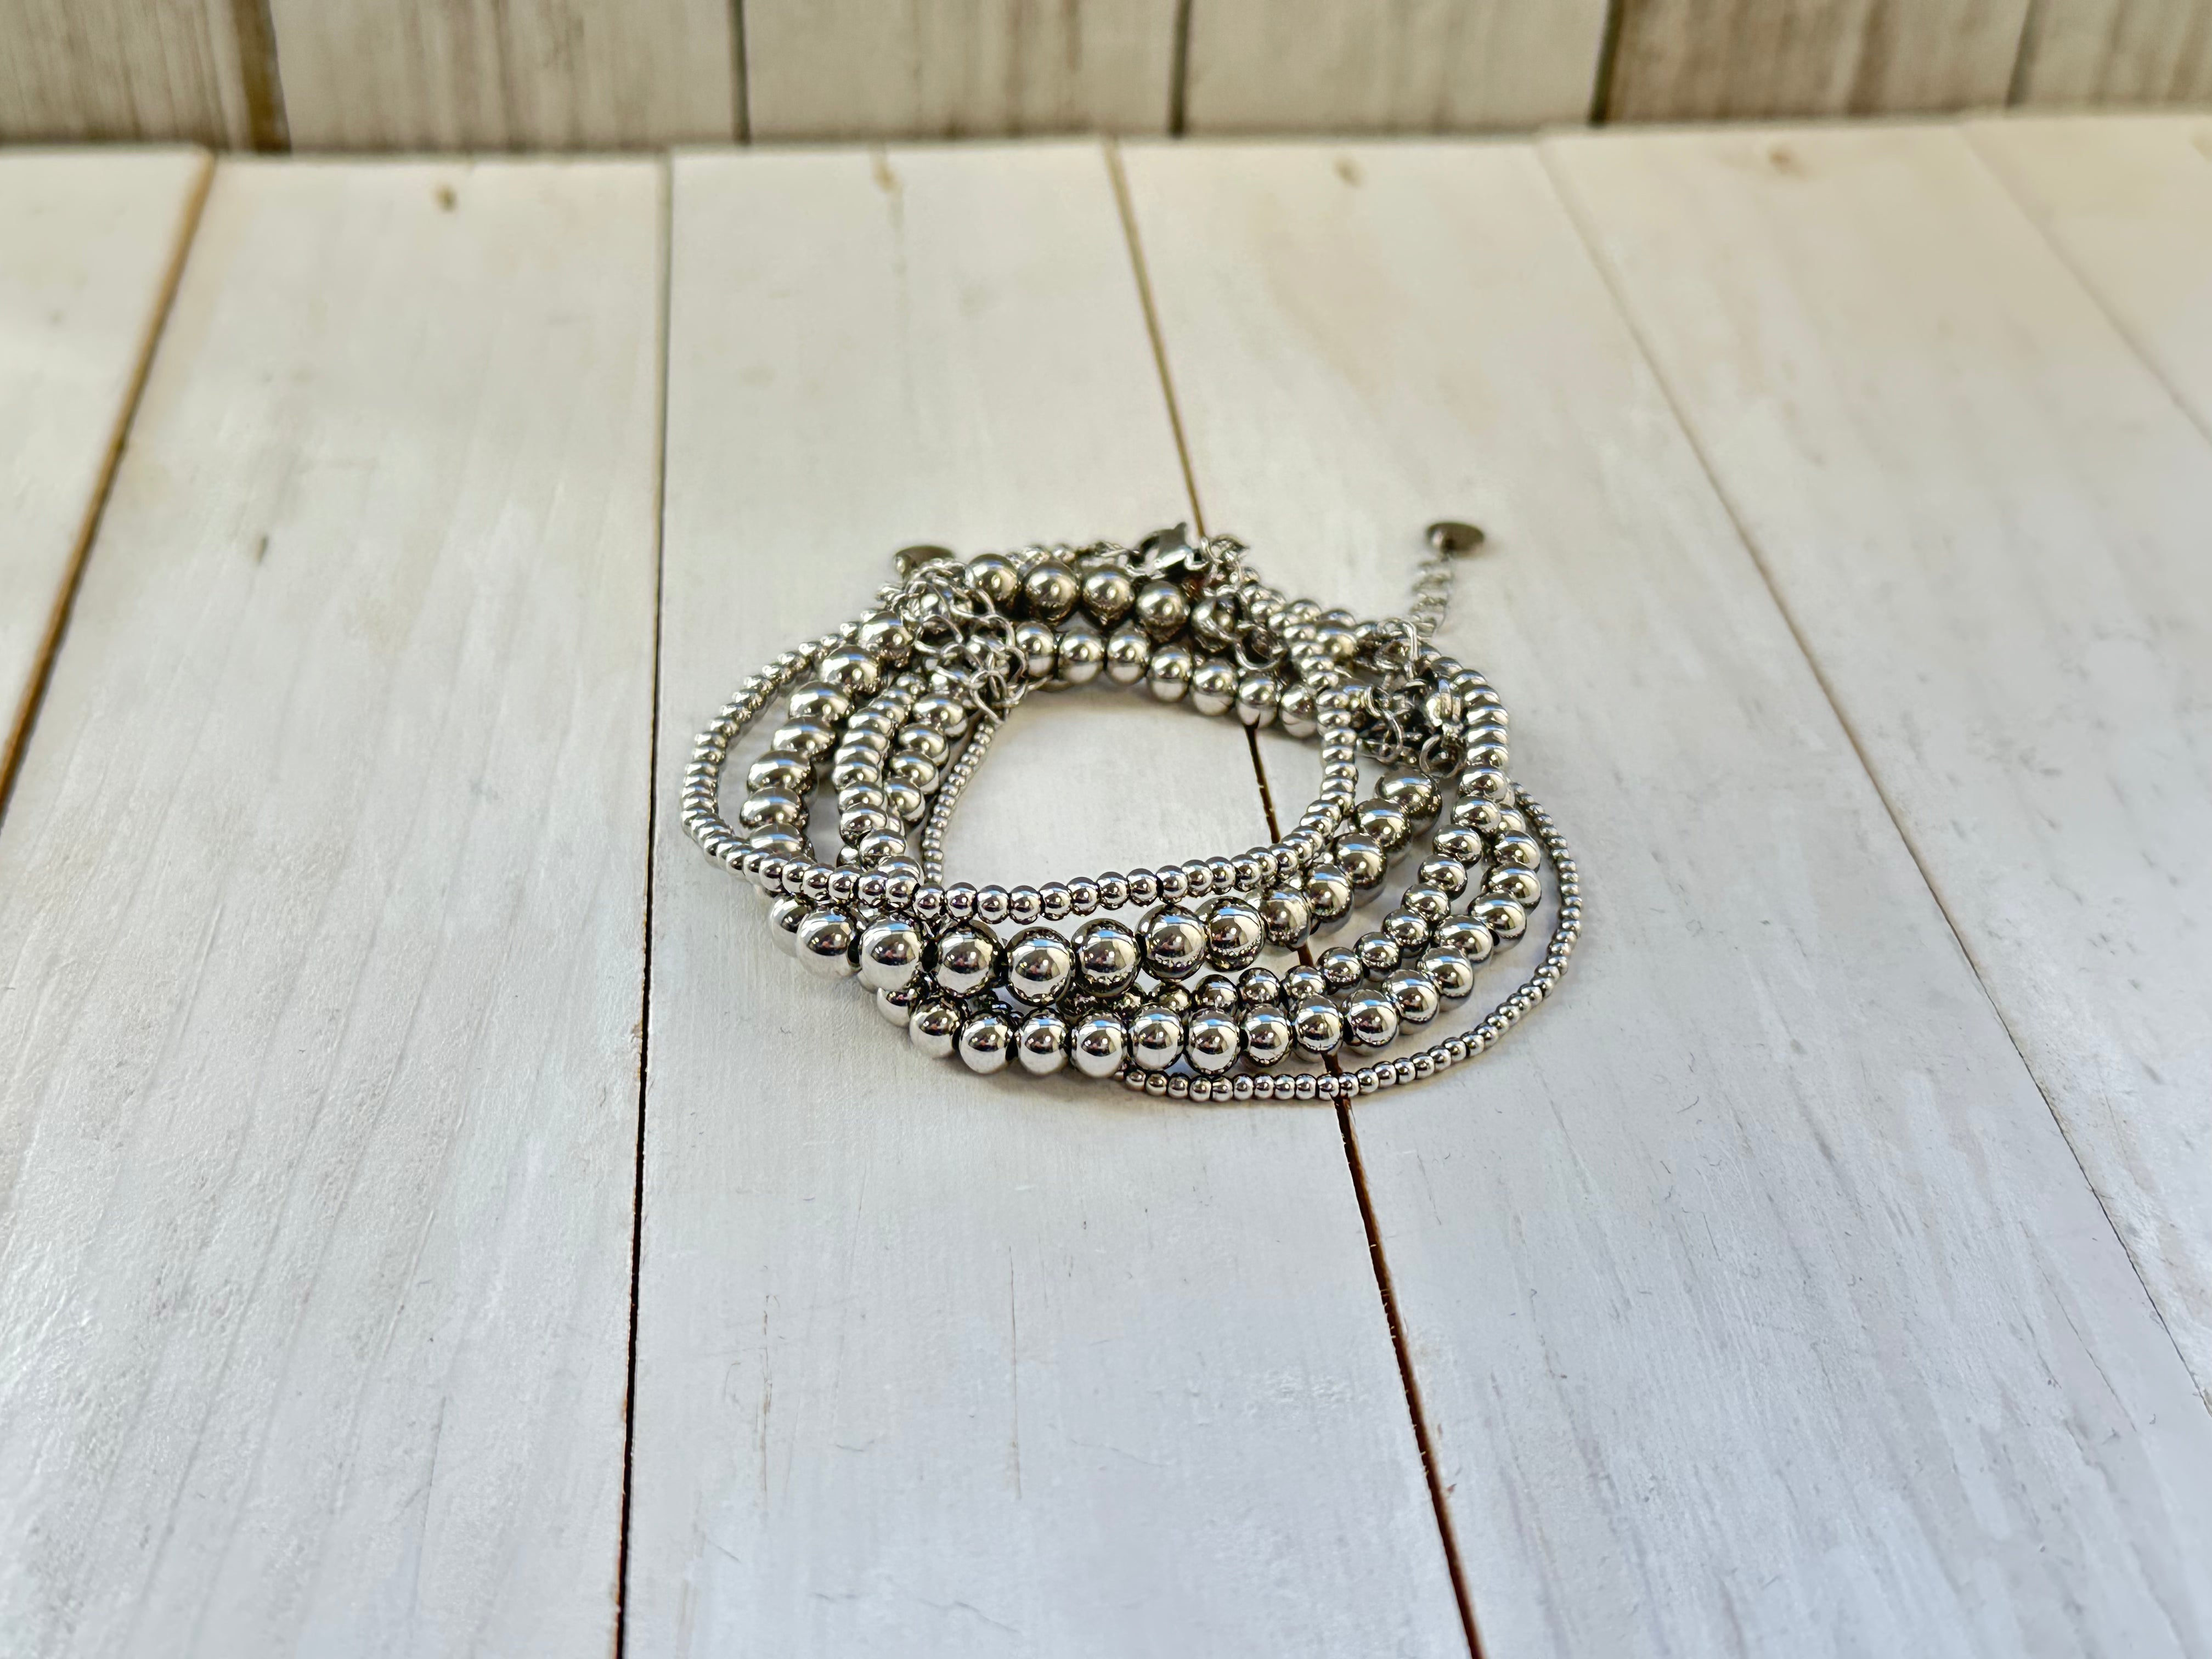 SILVER BALL BRACELETS - Stack or Individual